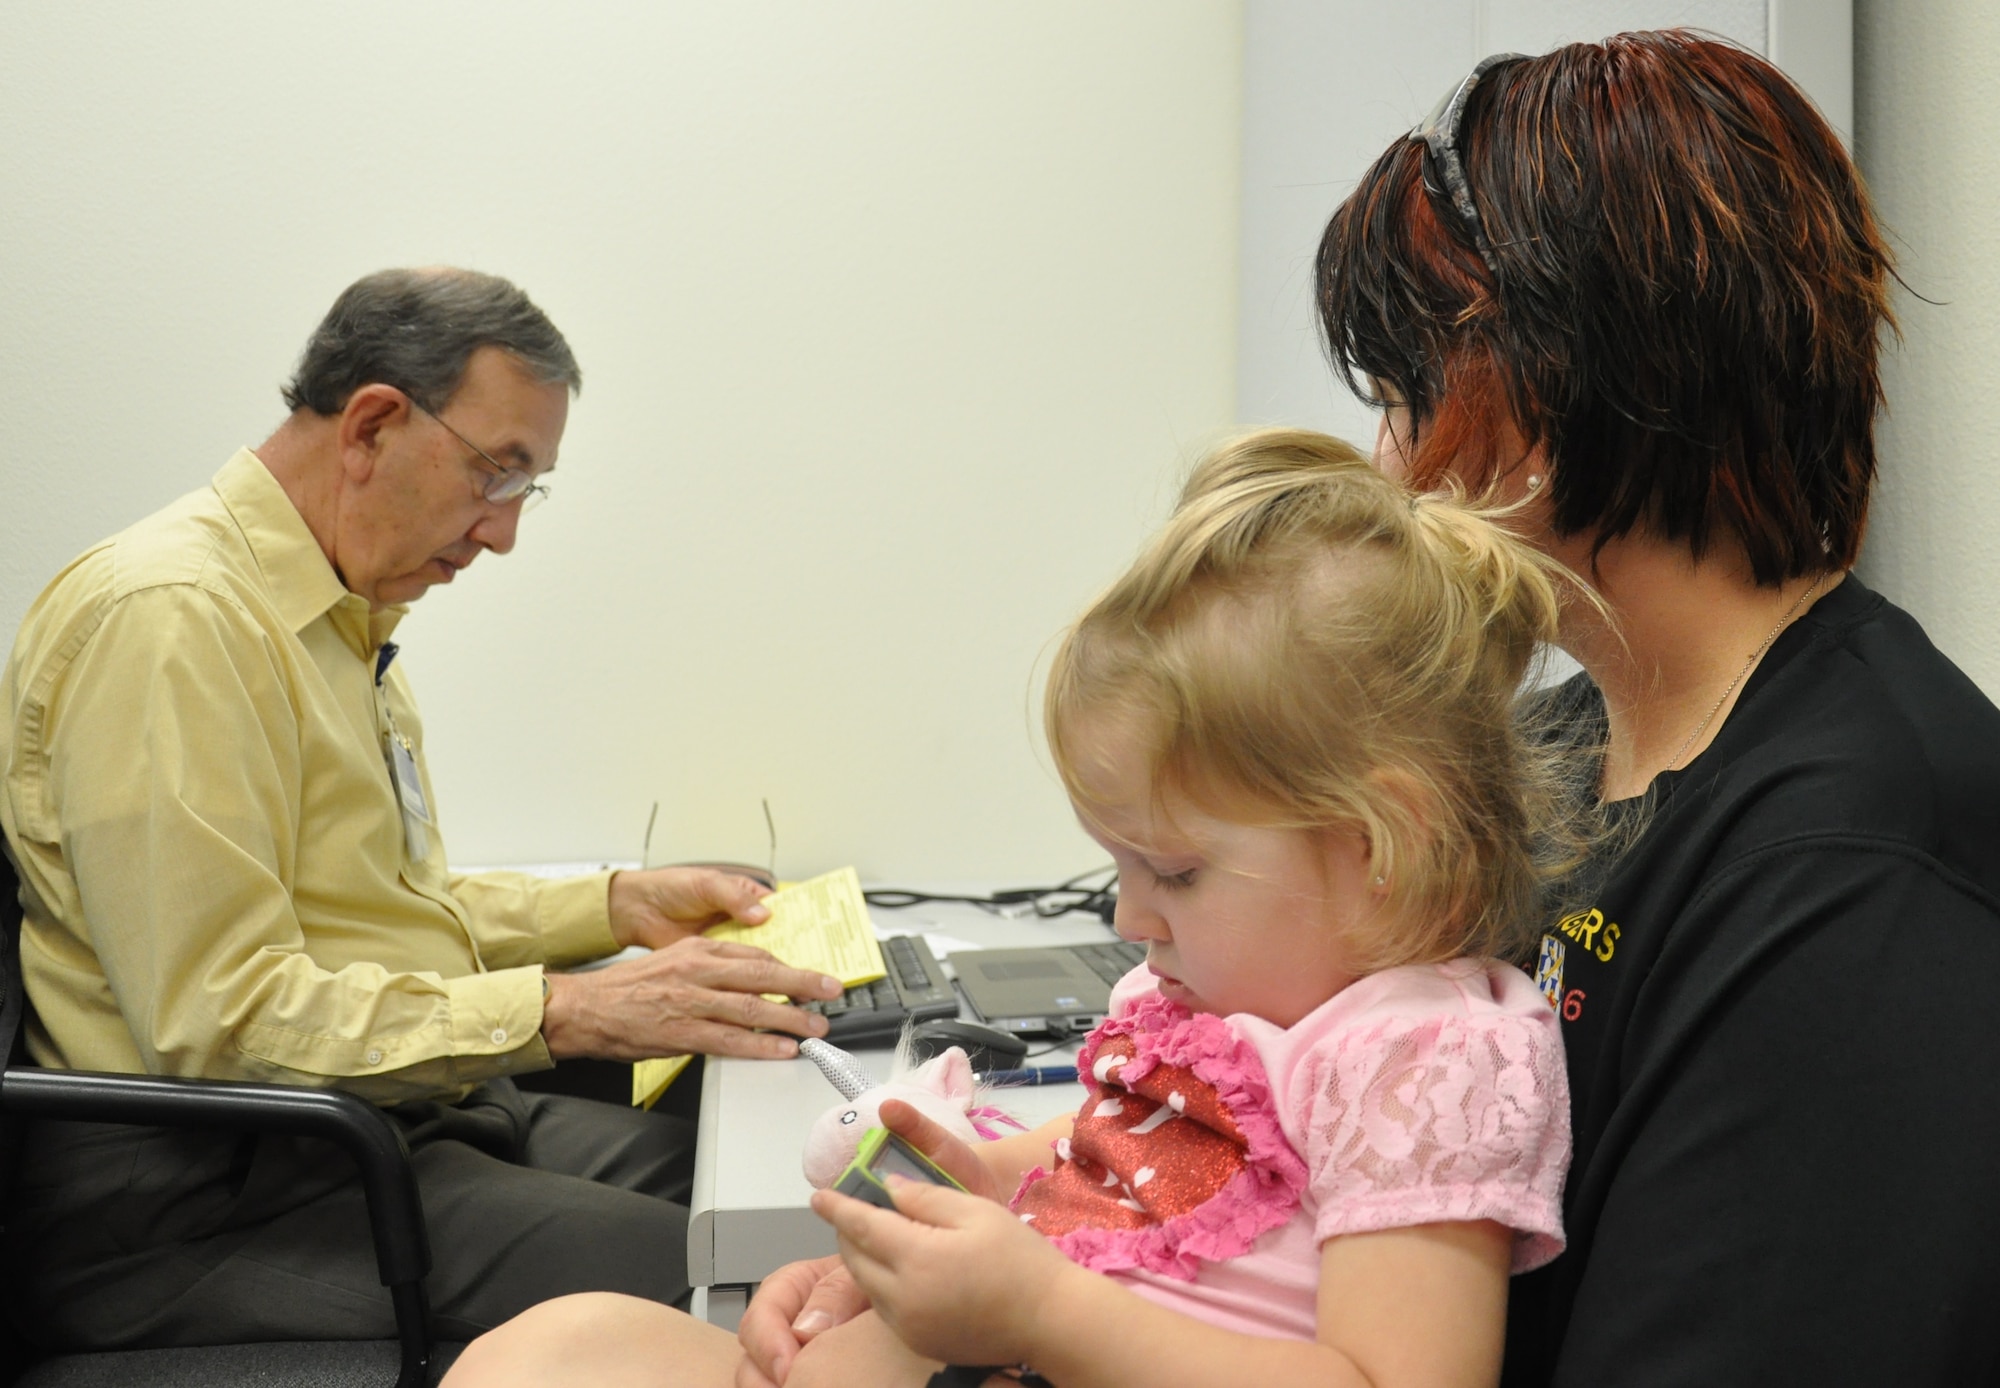 Amanda Behan and her daughter, Izzy, have their taxes prepared by Gary Little, a volunteer income tax preparer at the Volunteer Income Tax Assistance center, located in the Patrick AFB Shark Center. The center is open from 9 a.m. to 5 p.m. Monday through Friday until April 15.  The tax service is free of charge, but a food donation box will be available for people who wish to donate canned or boxed food. The food will be distributed to local area food programs. For more information, or to schedule an appointment, call (321) 494-4718. (U.S. Air Force Photo/Tech. Sgt. Erin Smith)